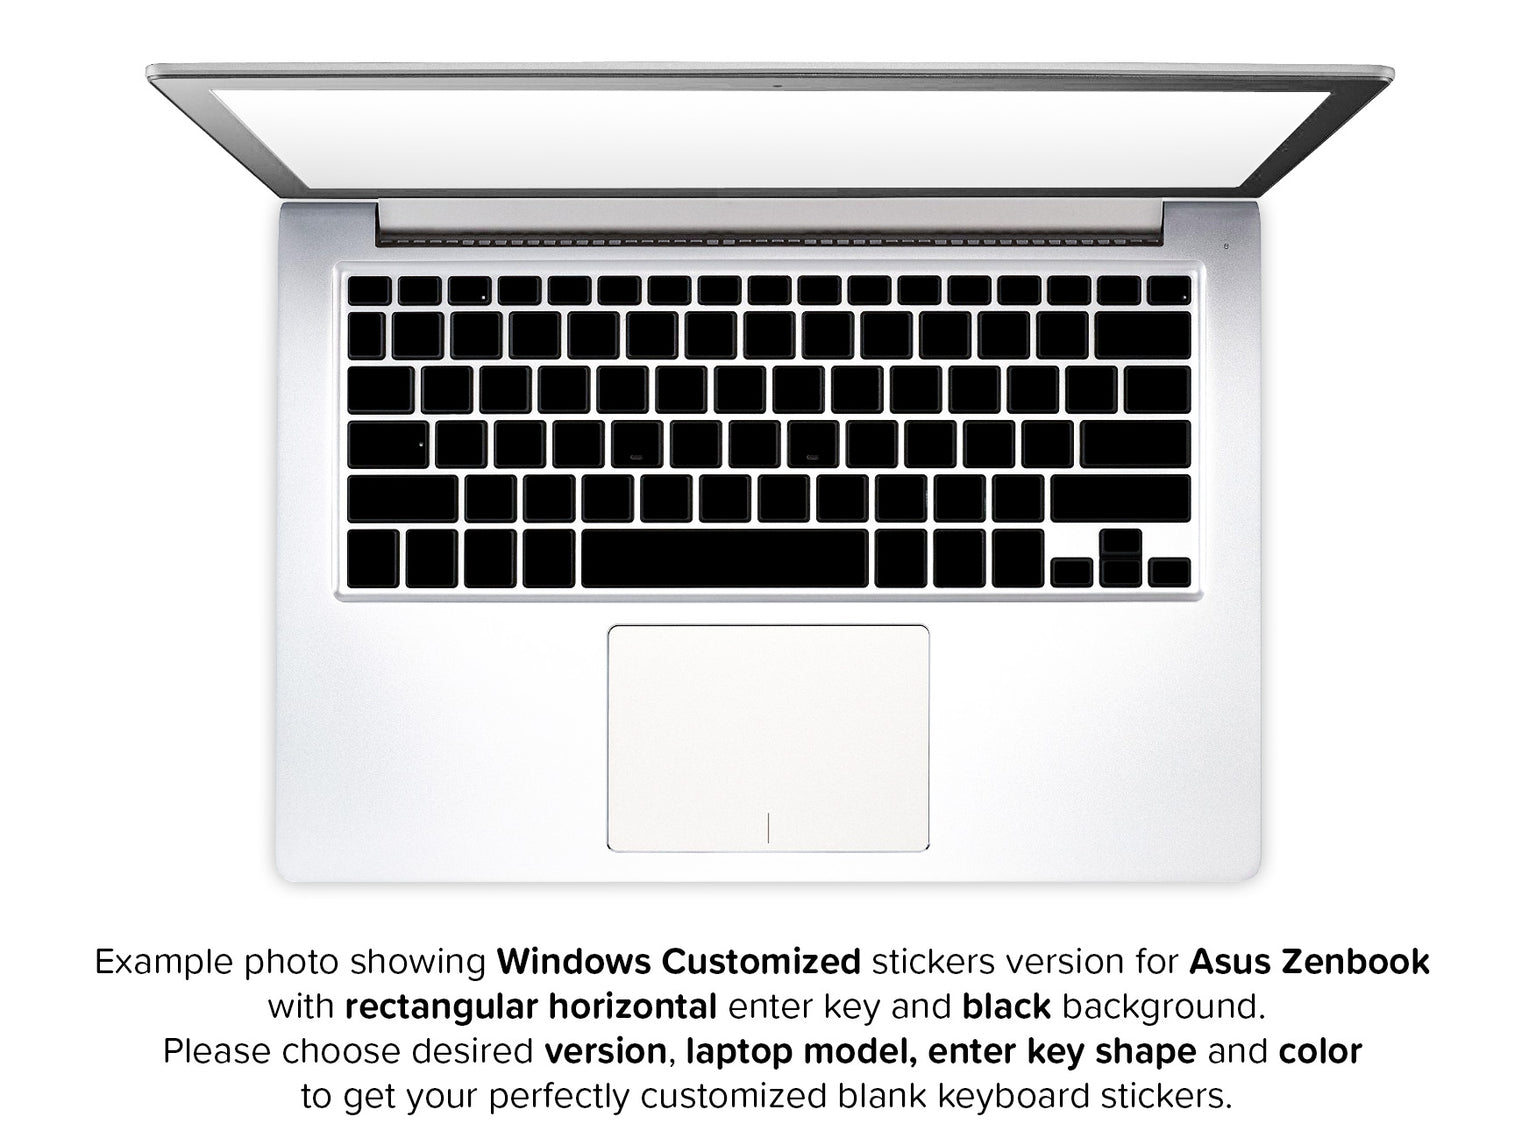 Blank Windows Laptop Keyboard Stickers with no captions